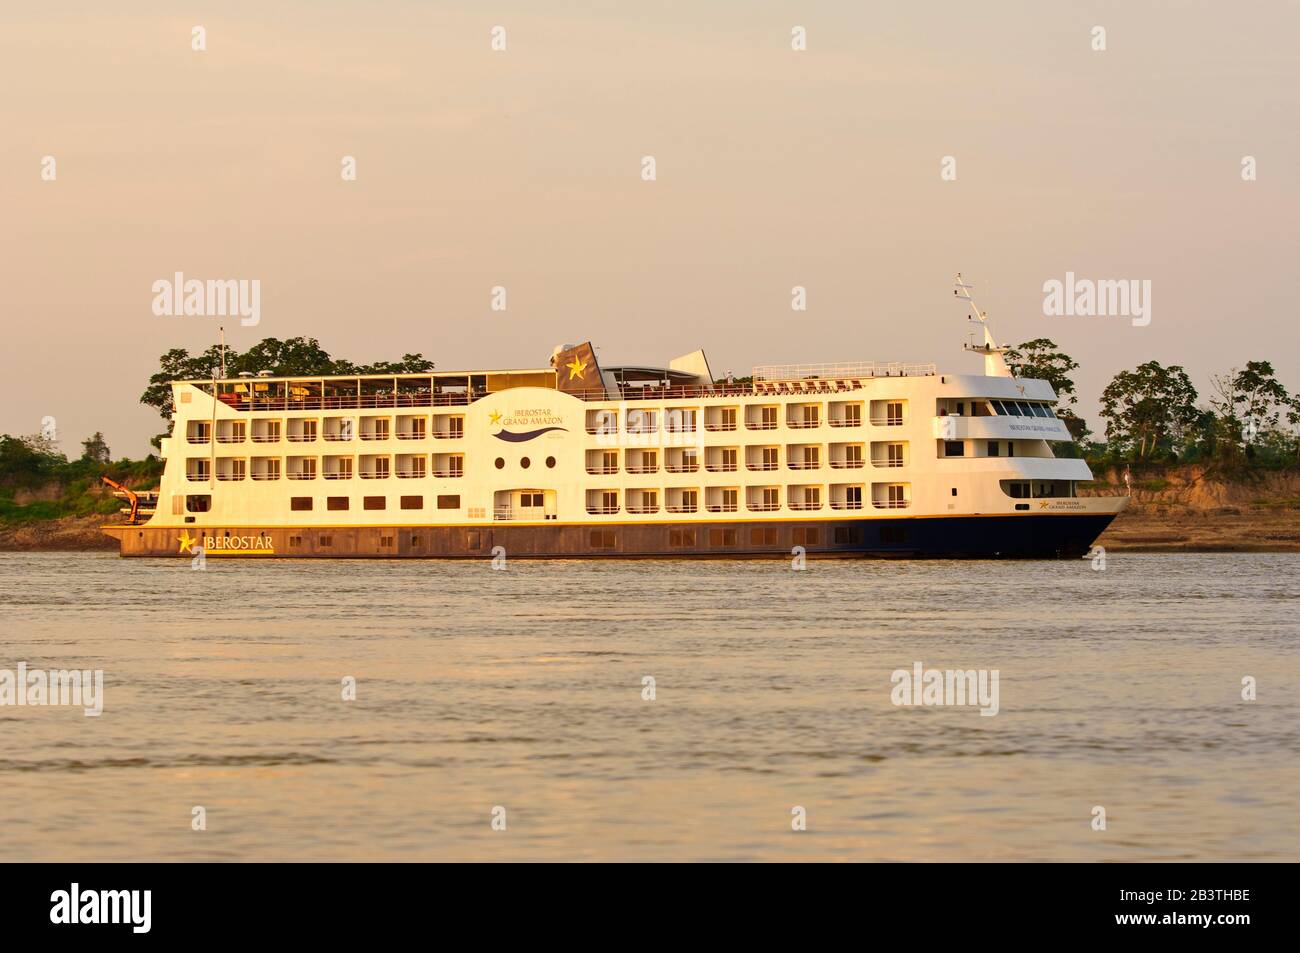 Page 6 - Luxus Schiff High Resolution Stock Photography and Images - Alamy